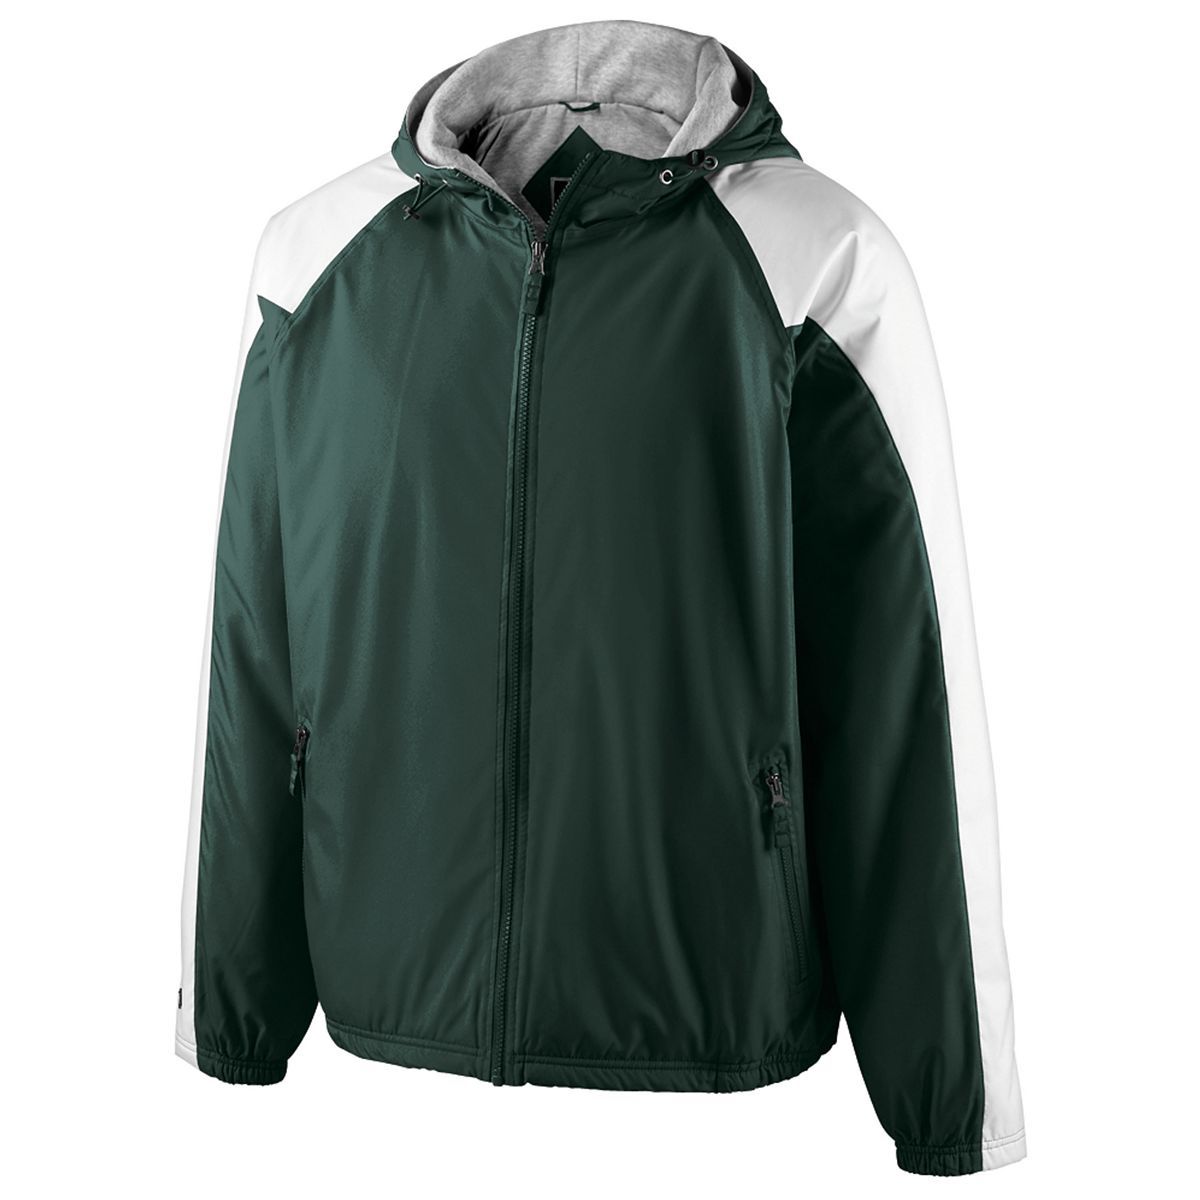 Holloway Homefield Jacket in Dark Green/White  -Part of the Adult, Adult-Jacket, Holloway, Outerwear product lines at KanaleyCreations.com